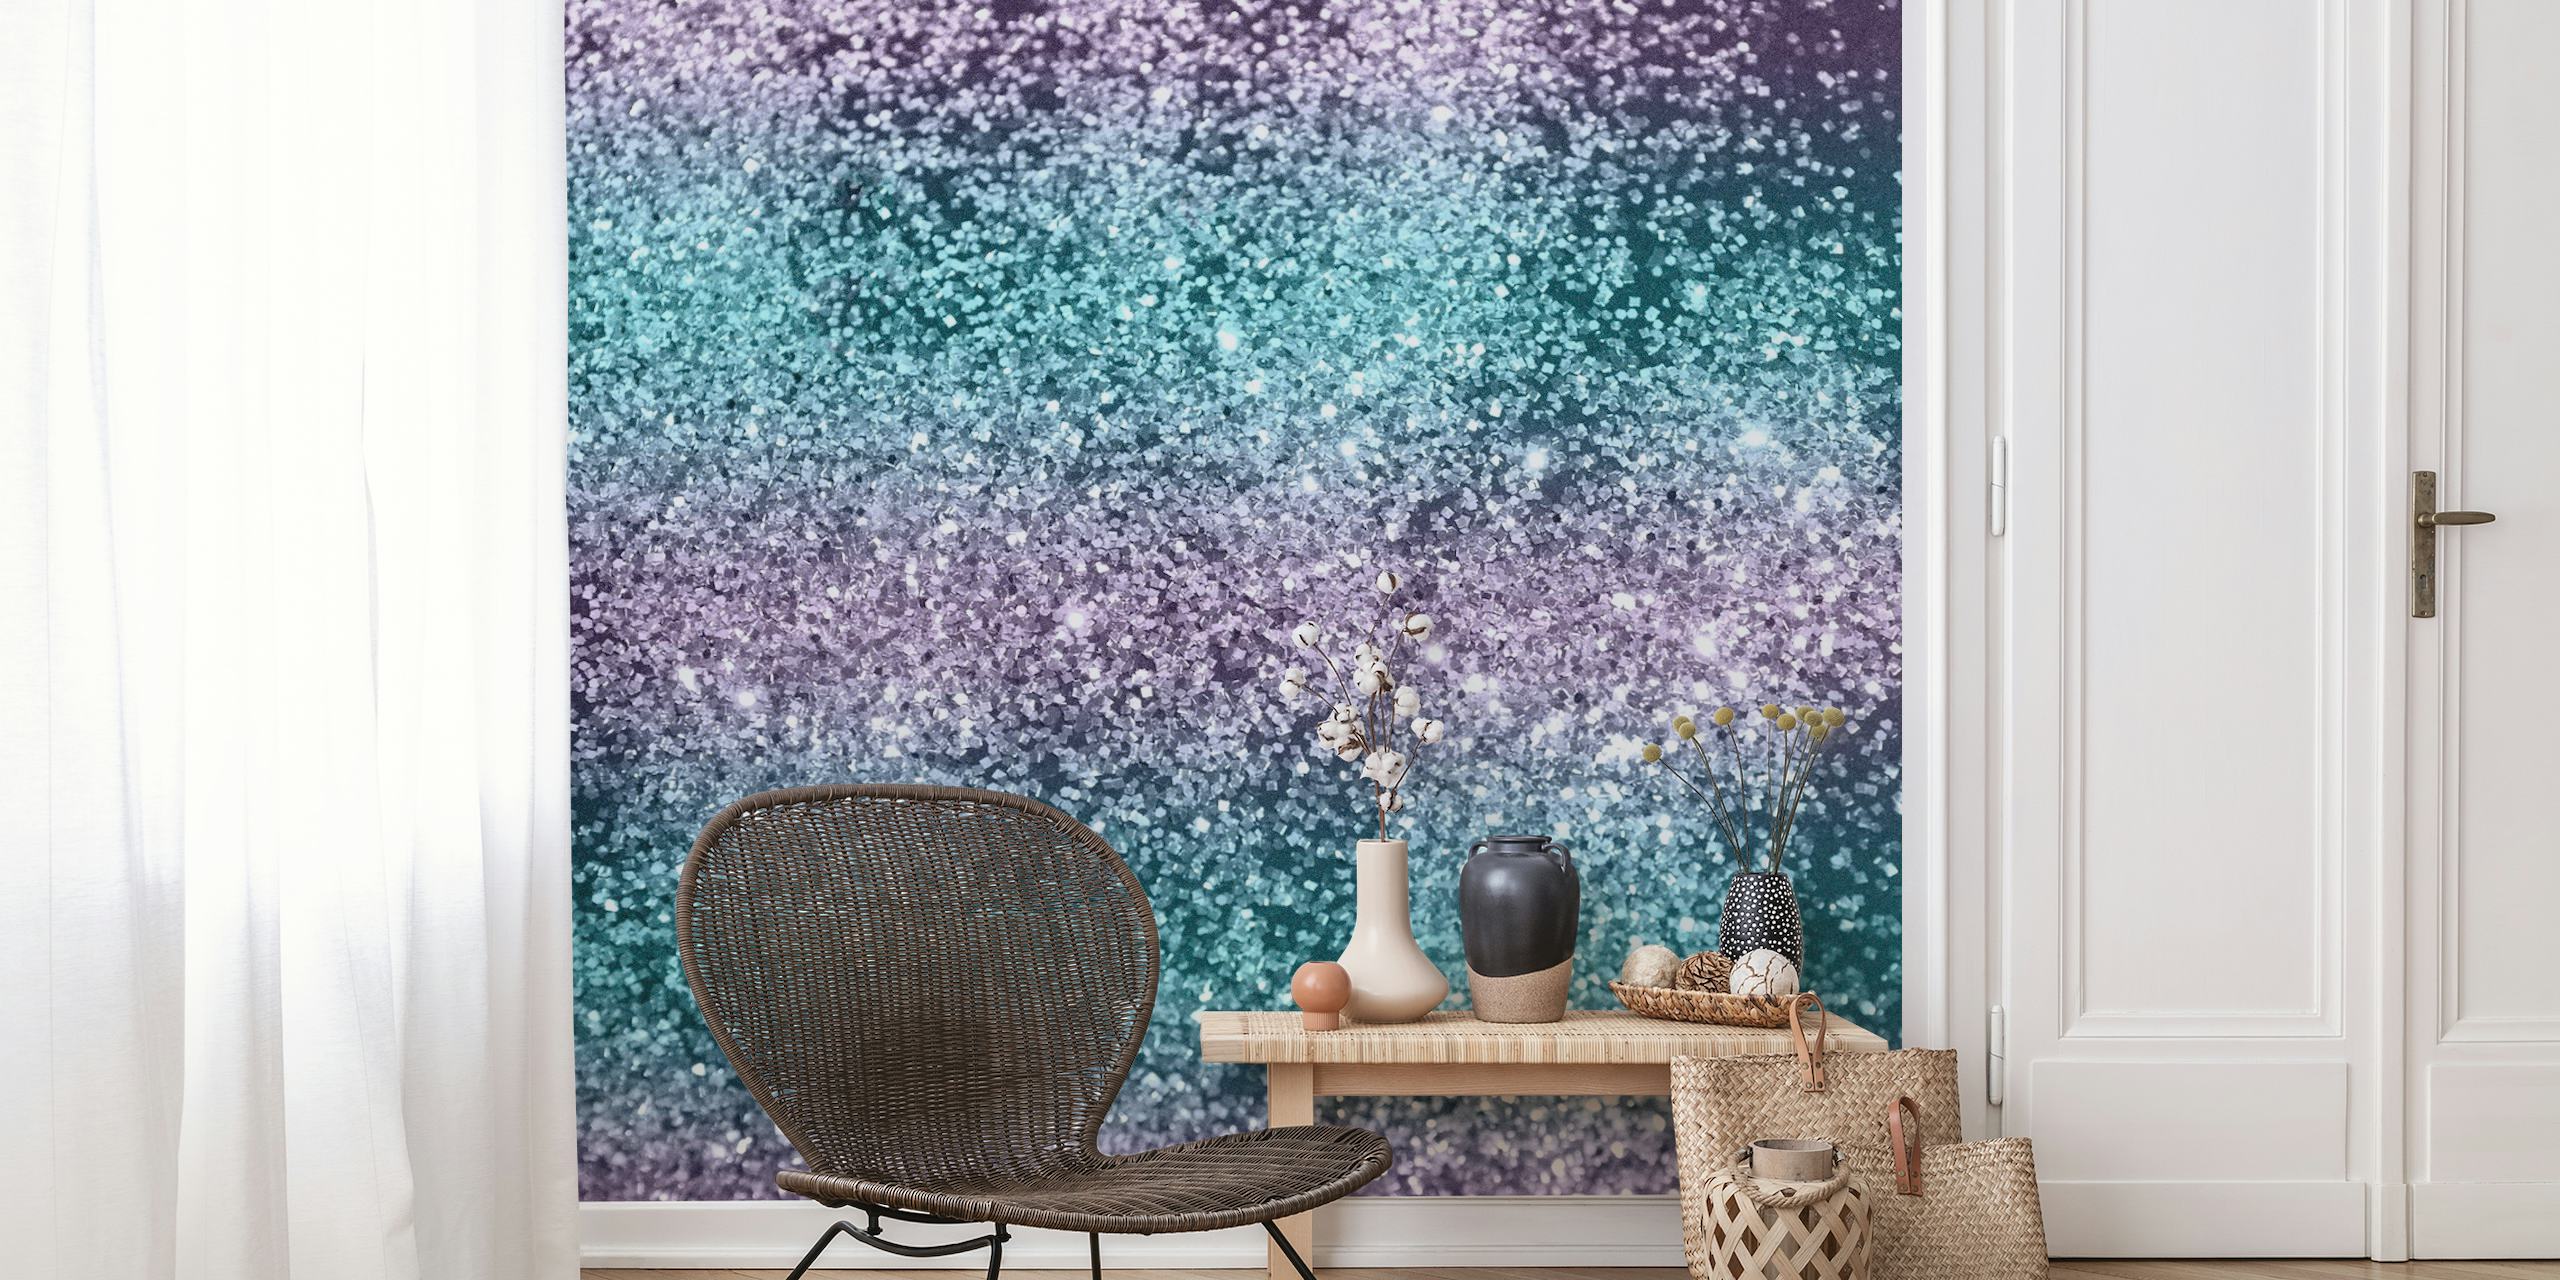 Glittery gradient wall mural with purples and aquas resembling a mermaid's tail